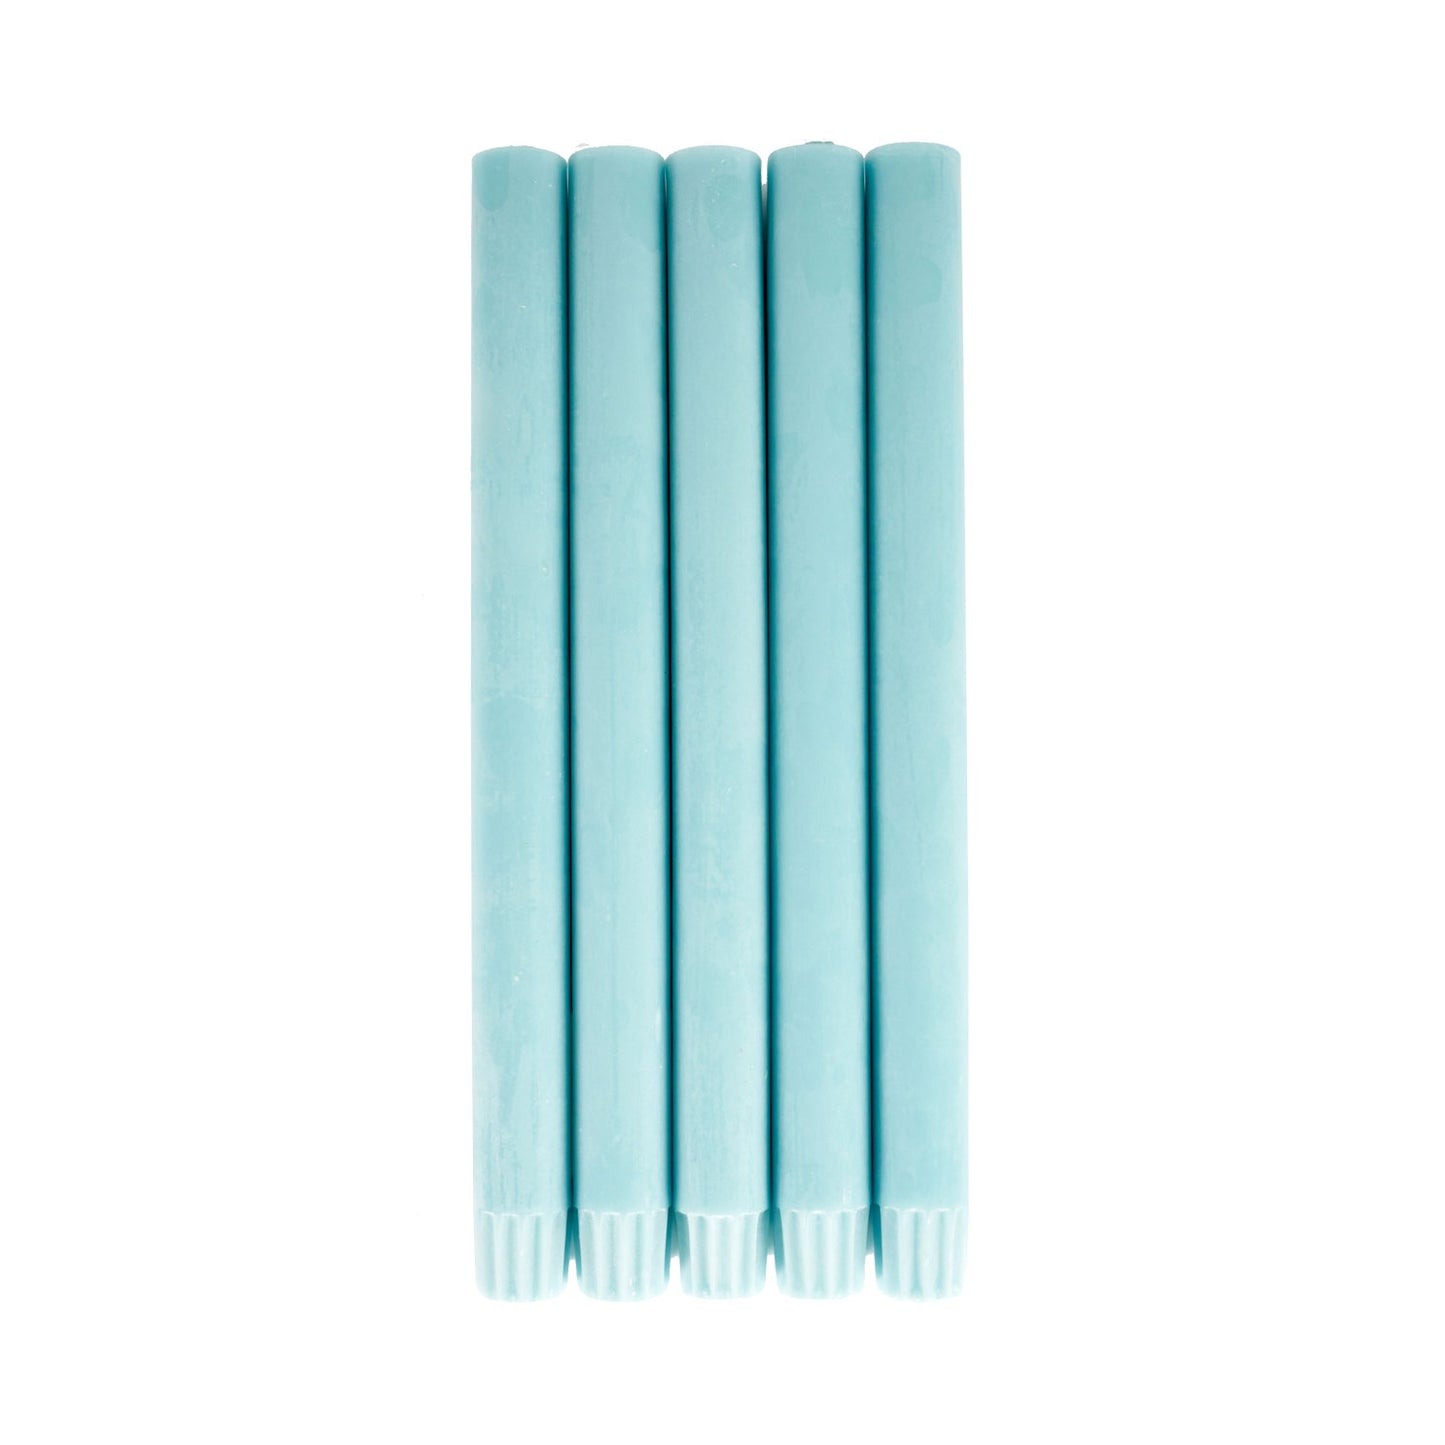 Powder Blue Dinner Candles - Pack of 25